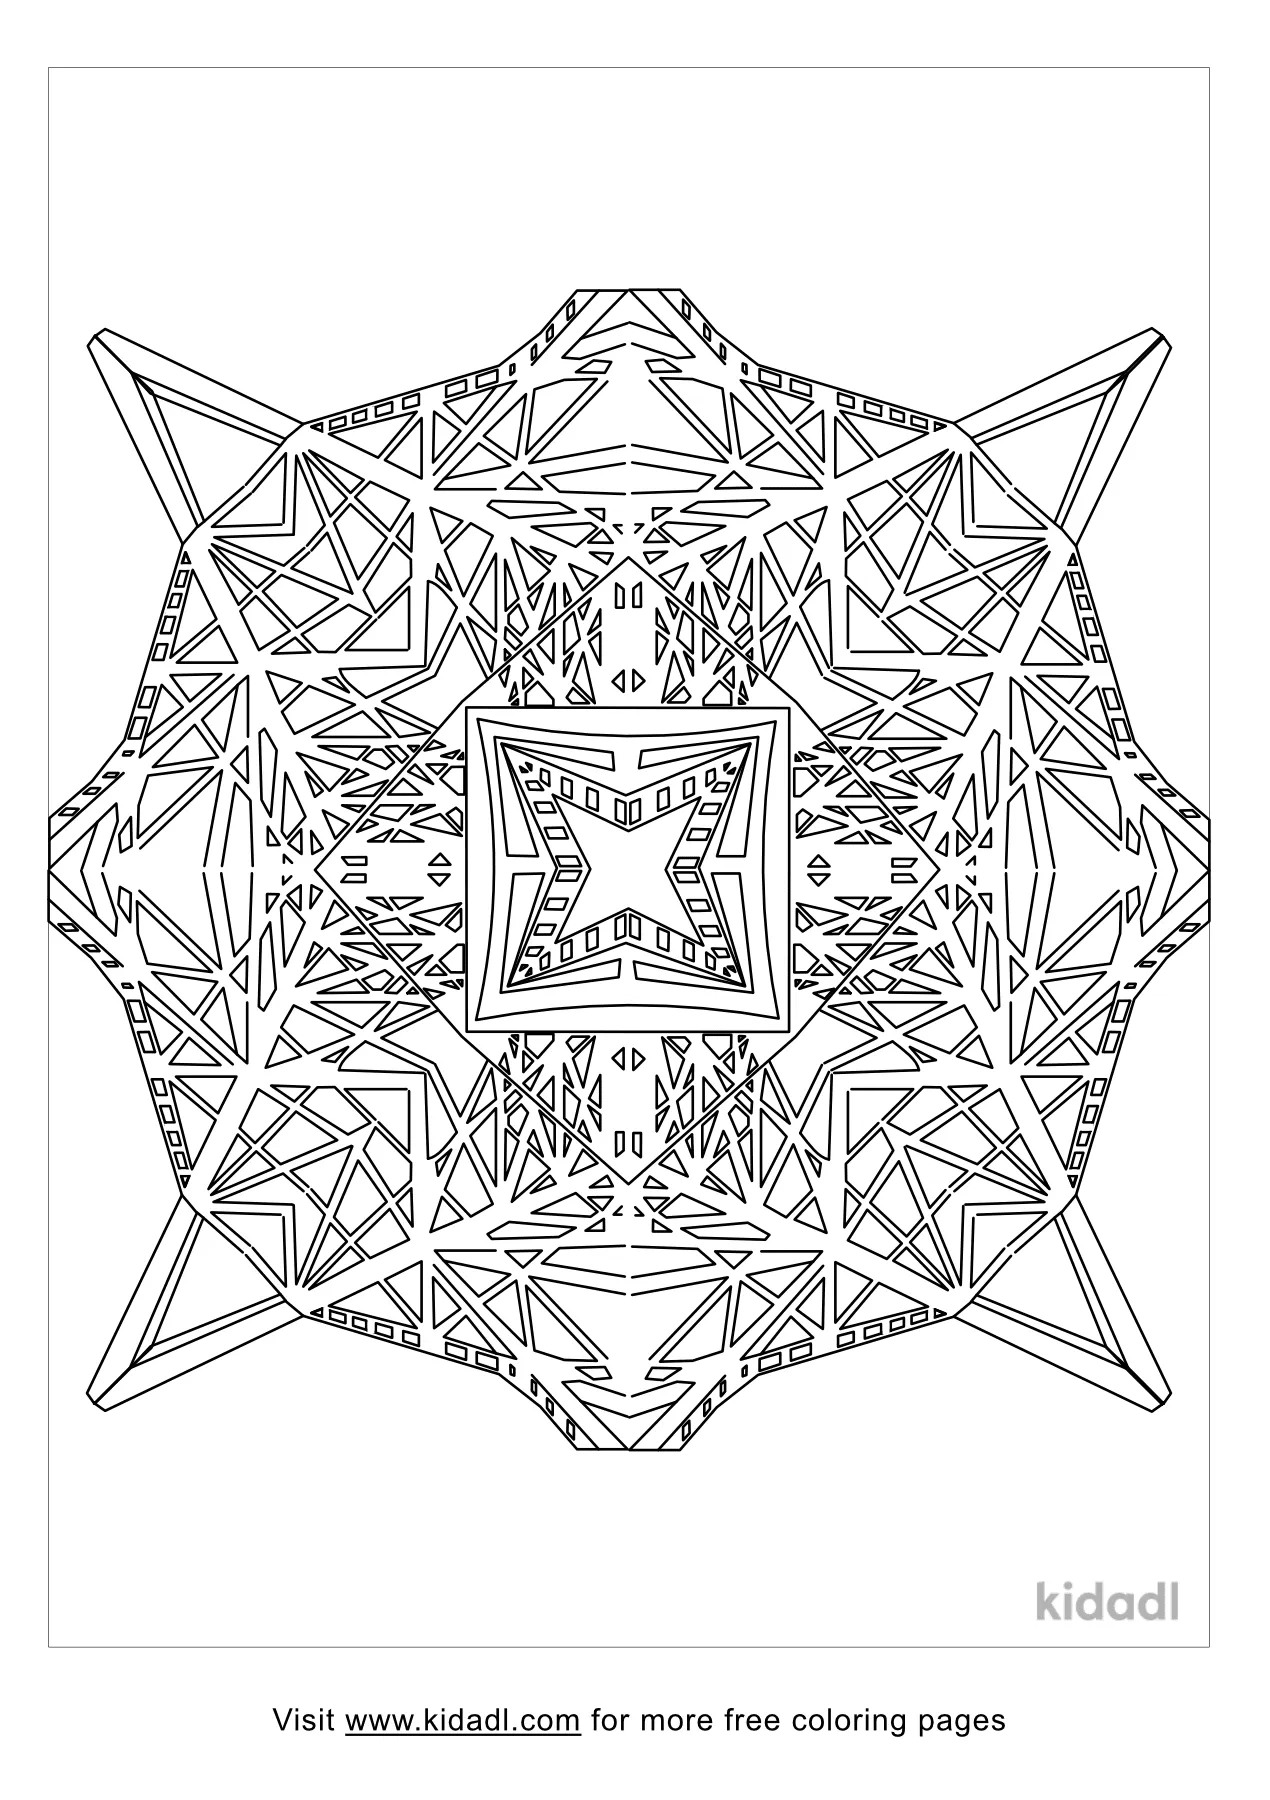 kaleidoscope activity coloring pages